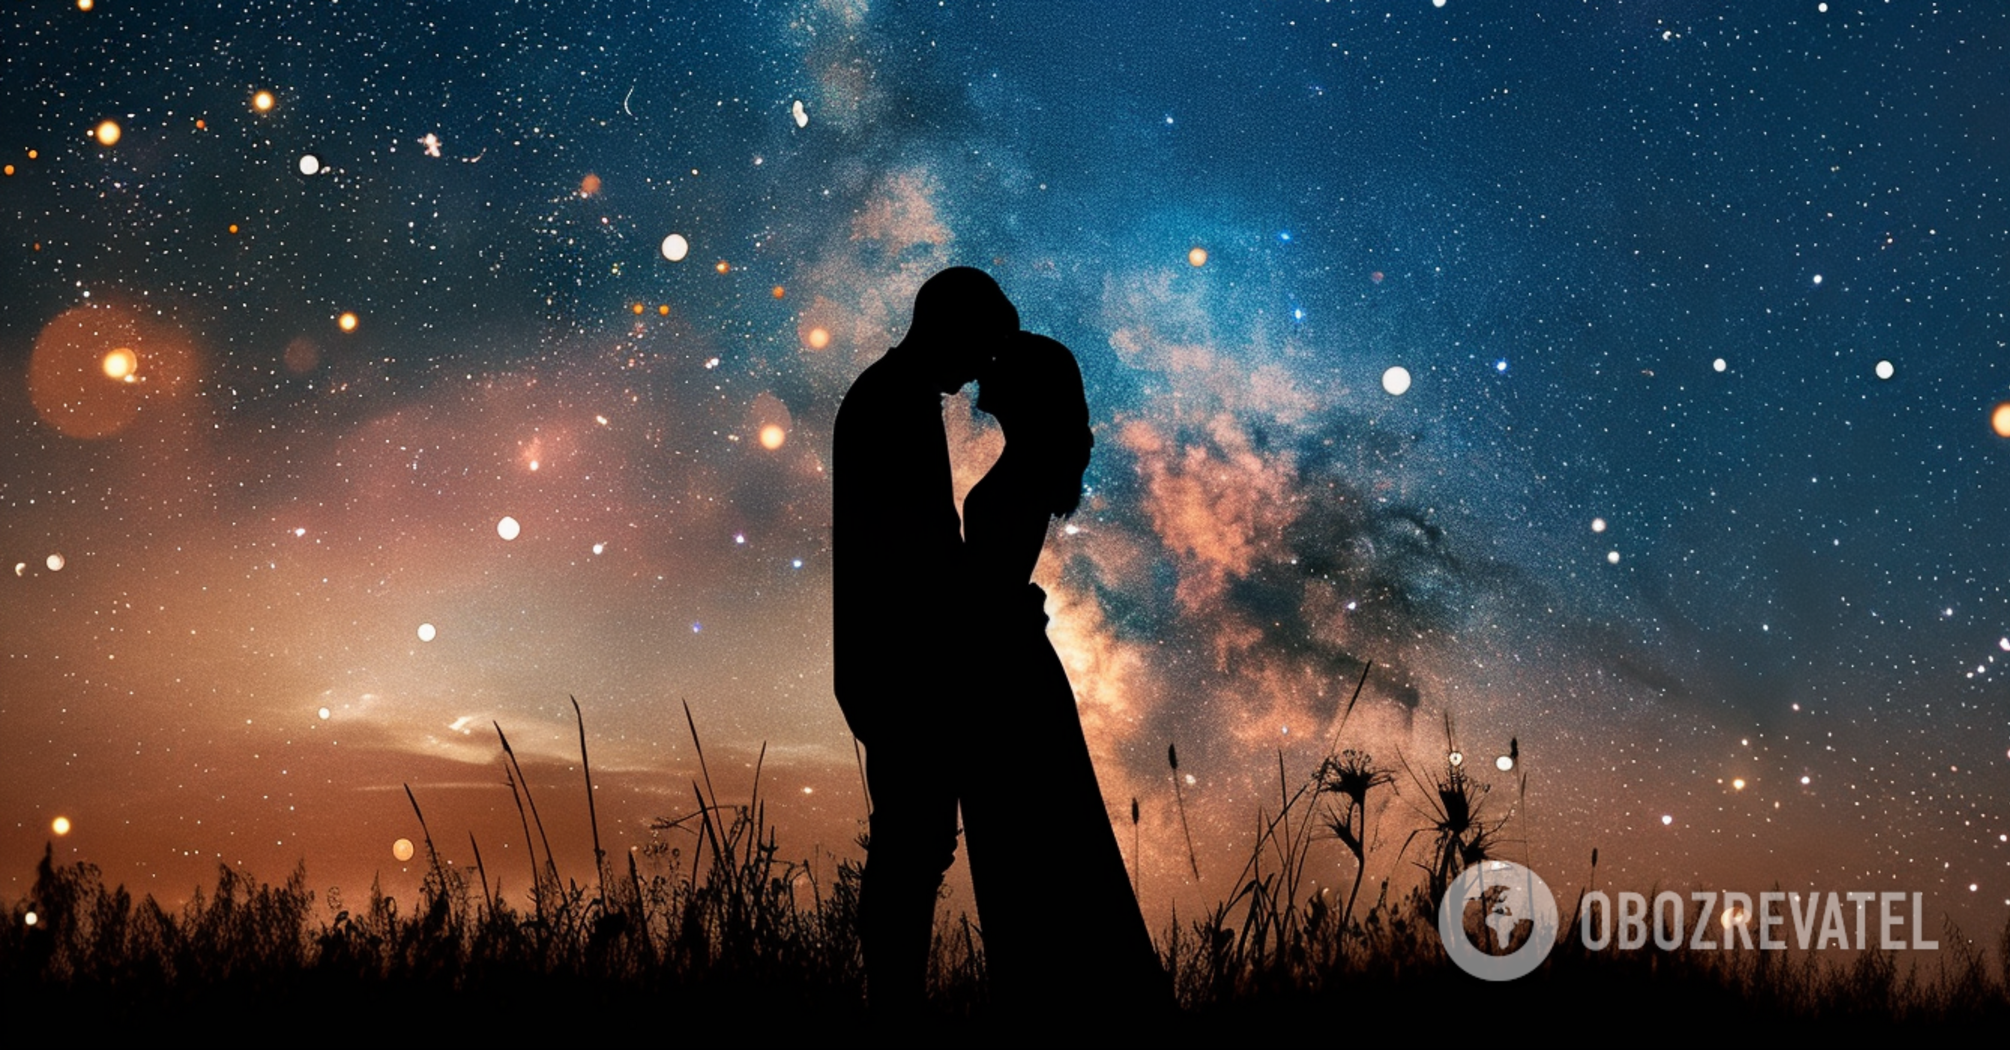 A breakthrough in love awaits three signs in the coming days: horoscope